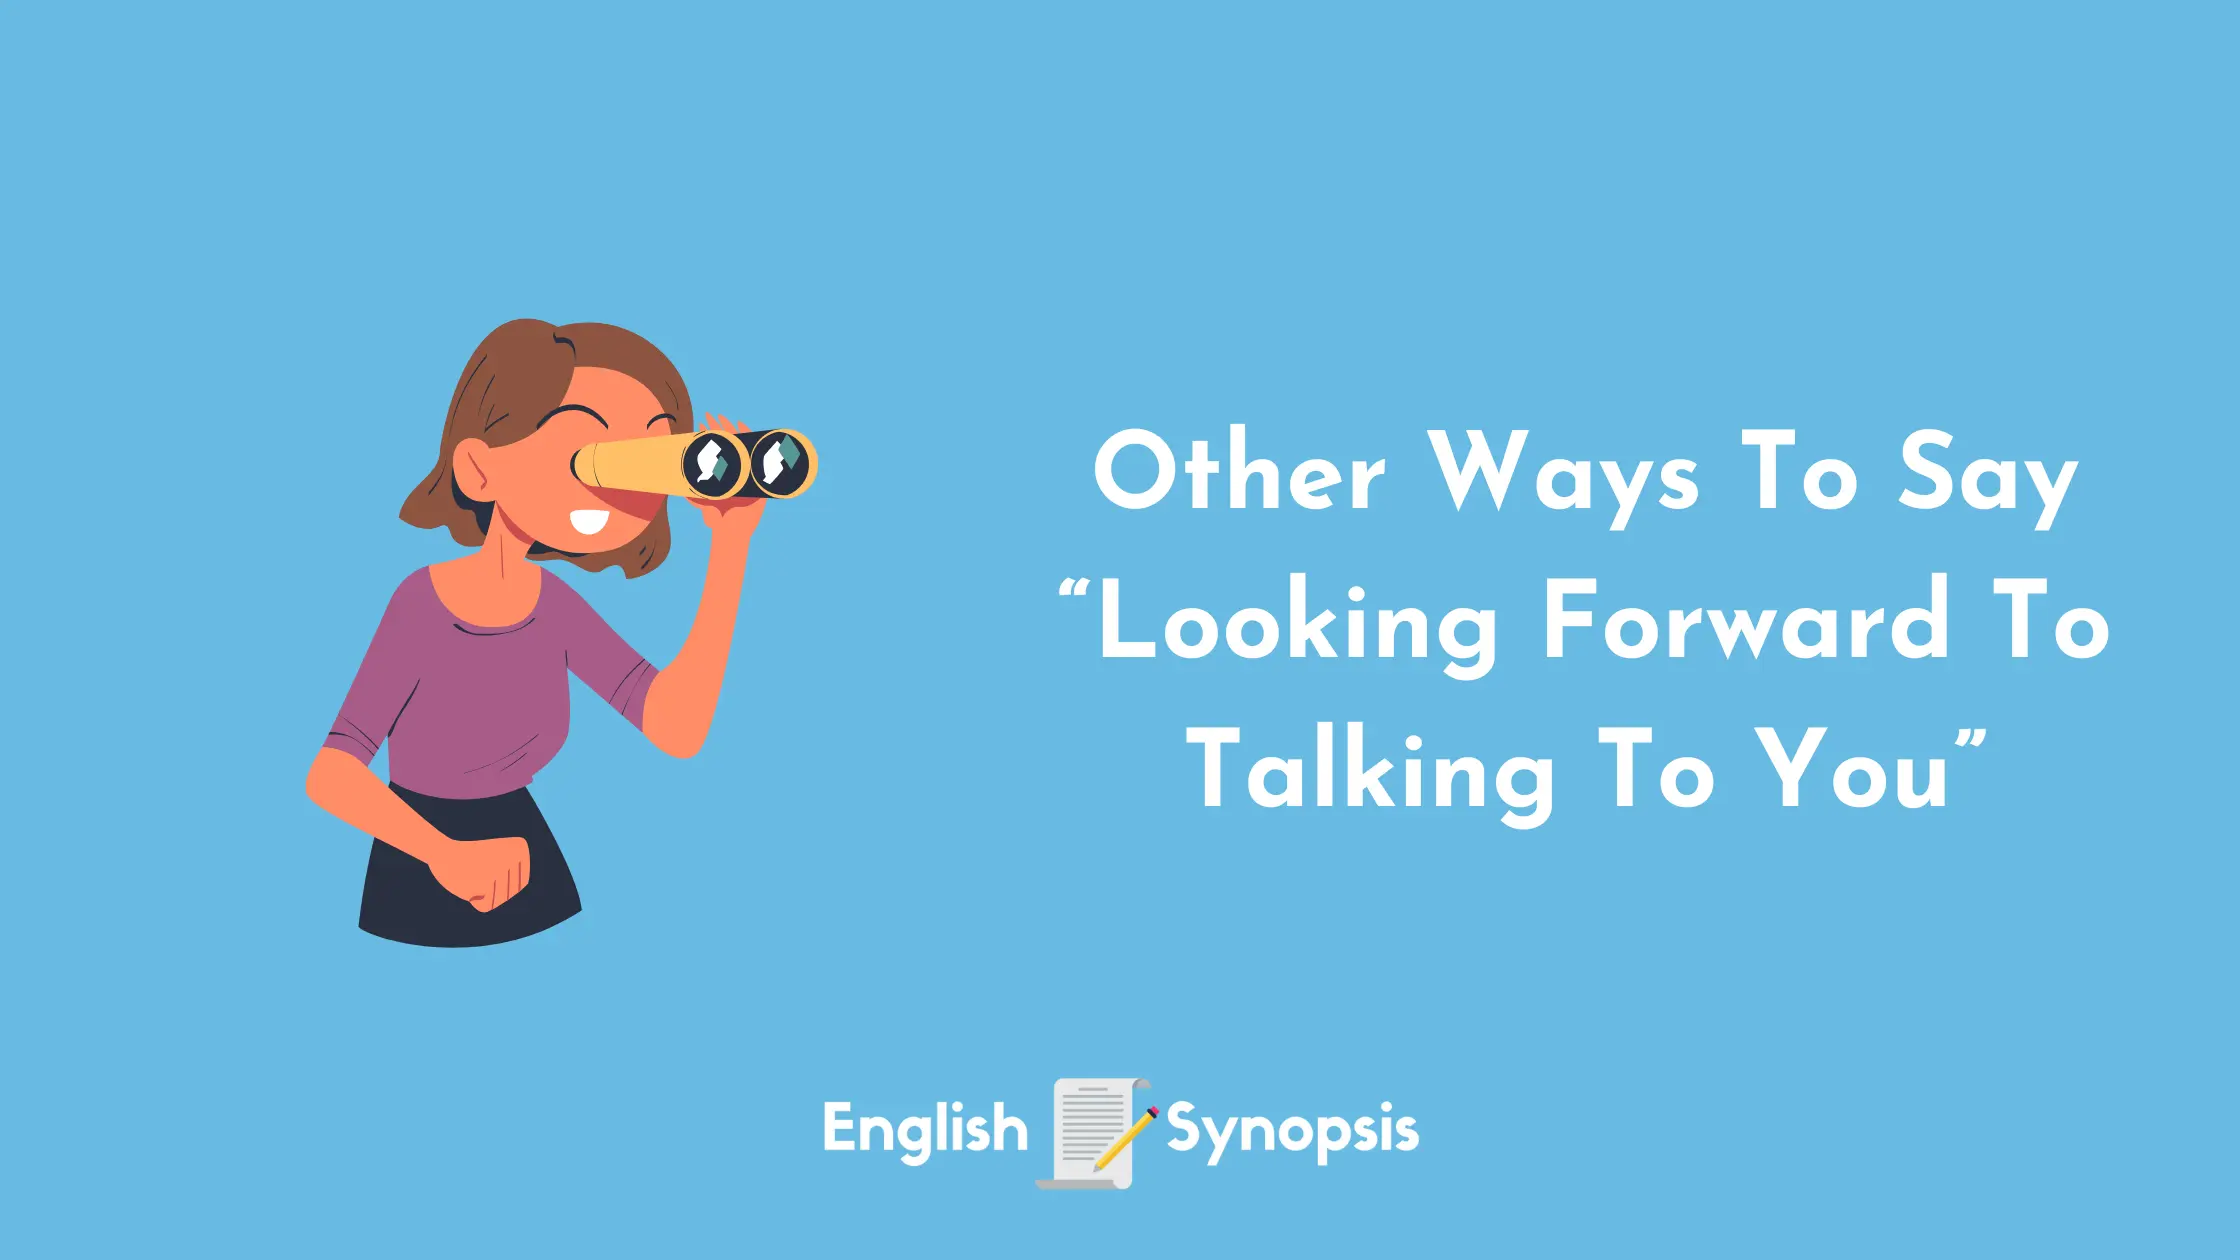 Other Ways To Say "Looking Forward To Talking To You"